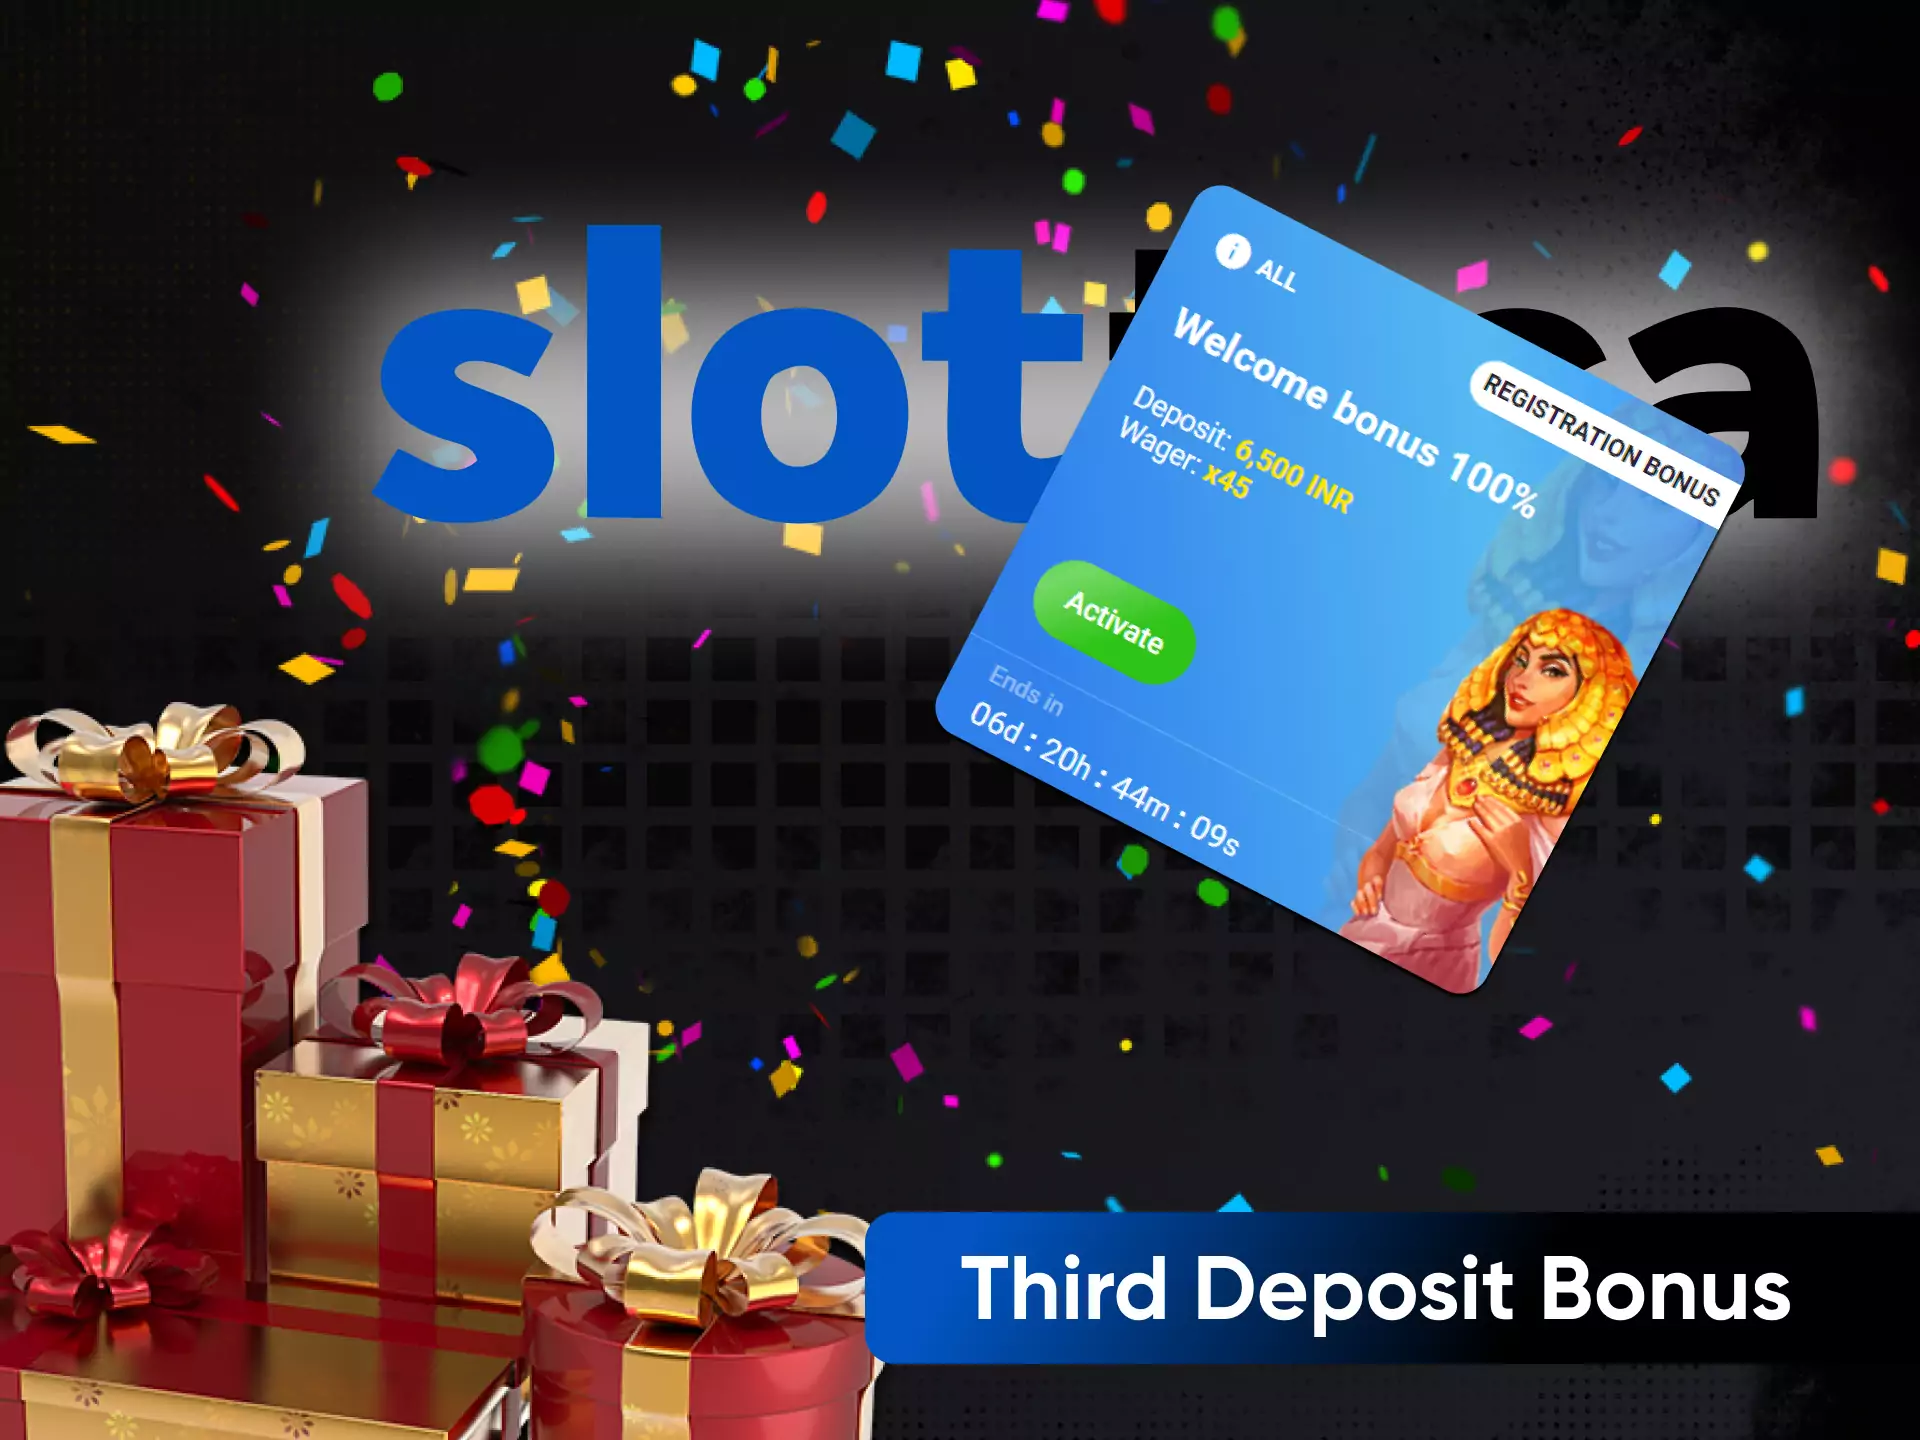 On Slottica, there is a third-deposit bonus as well.